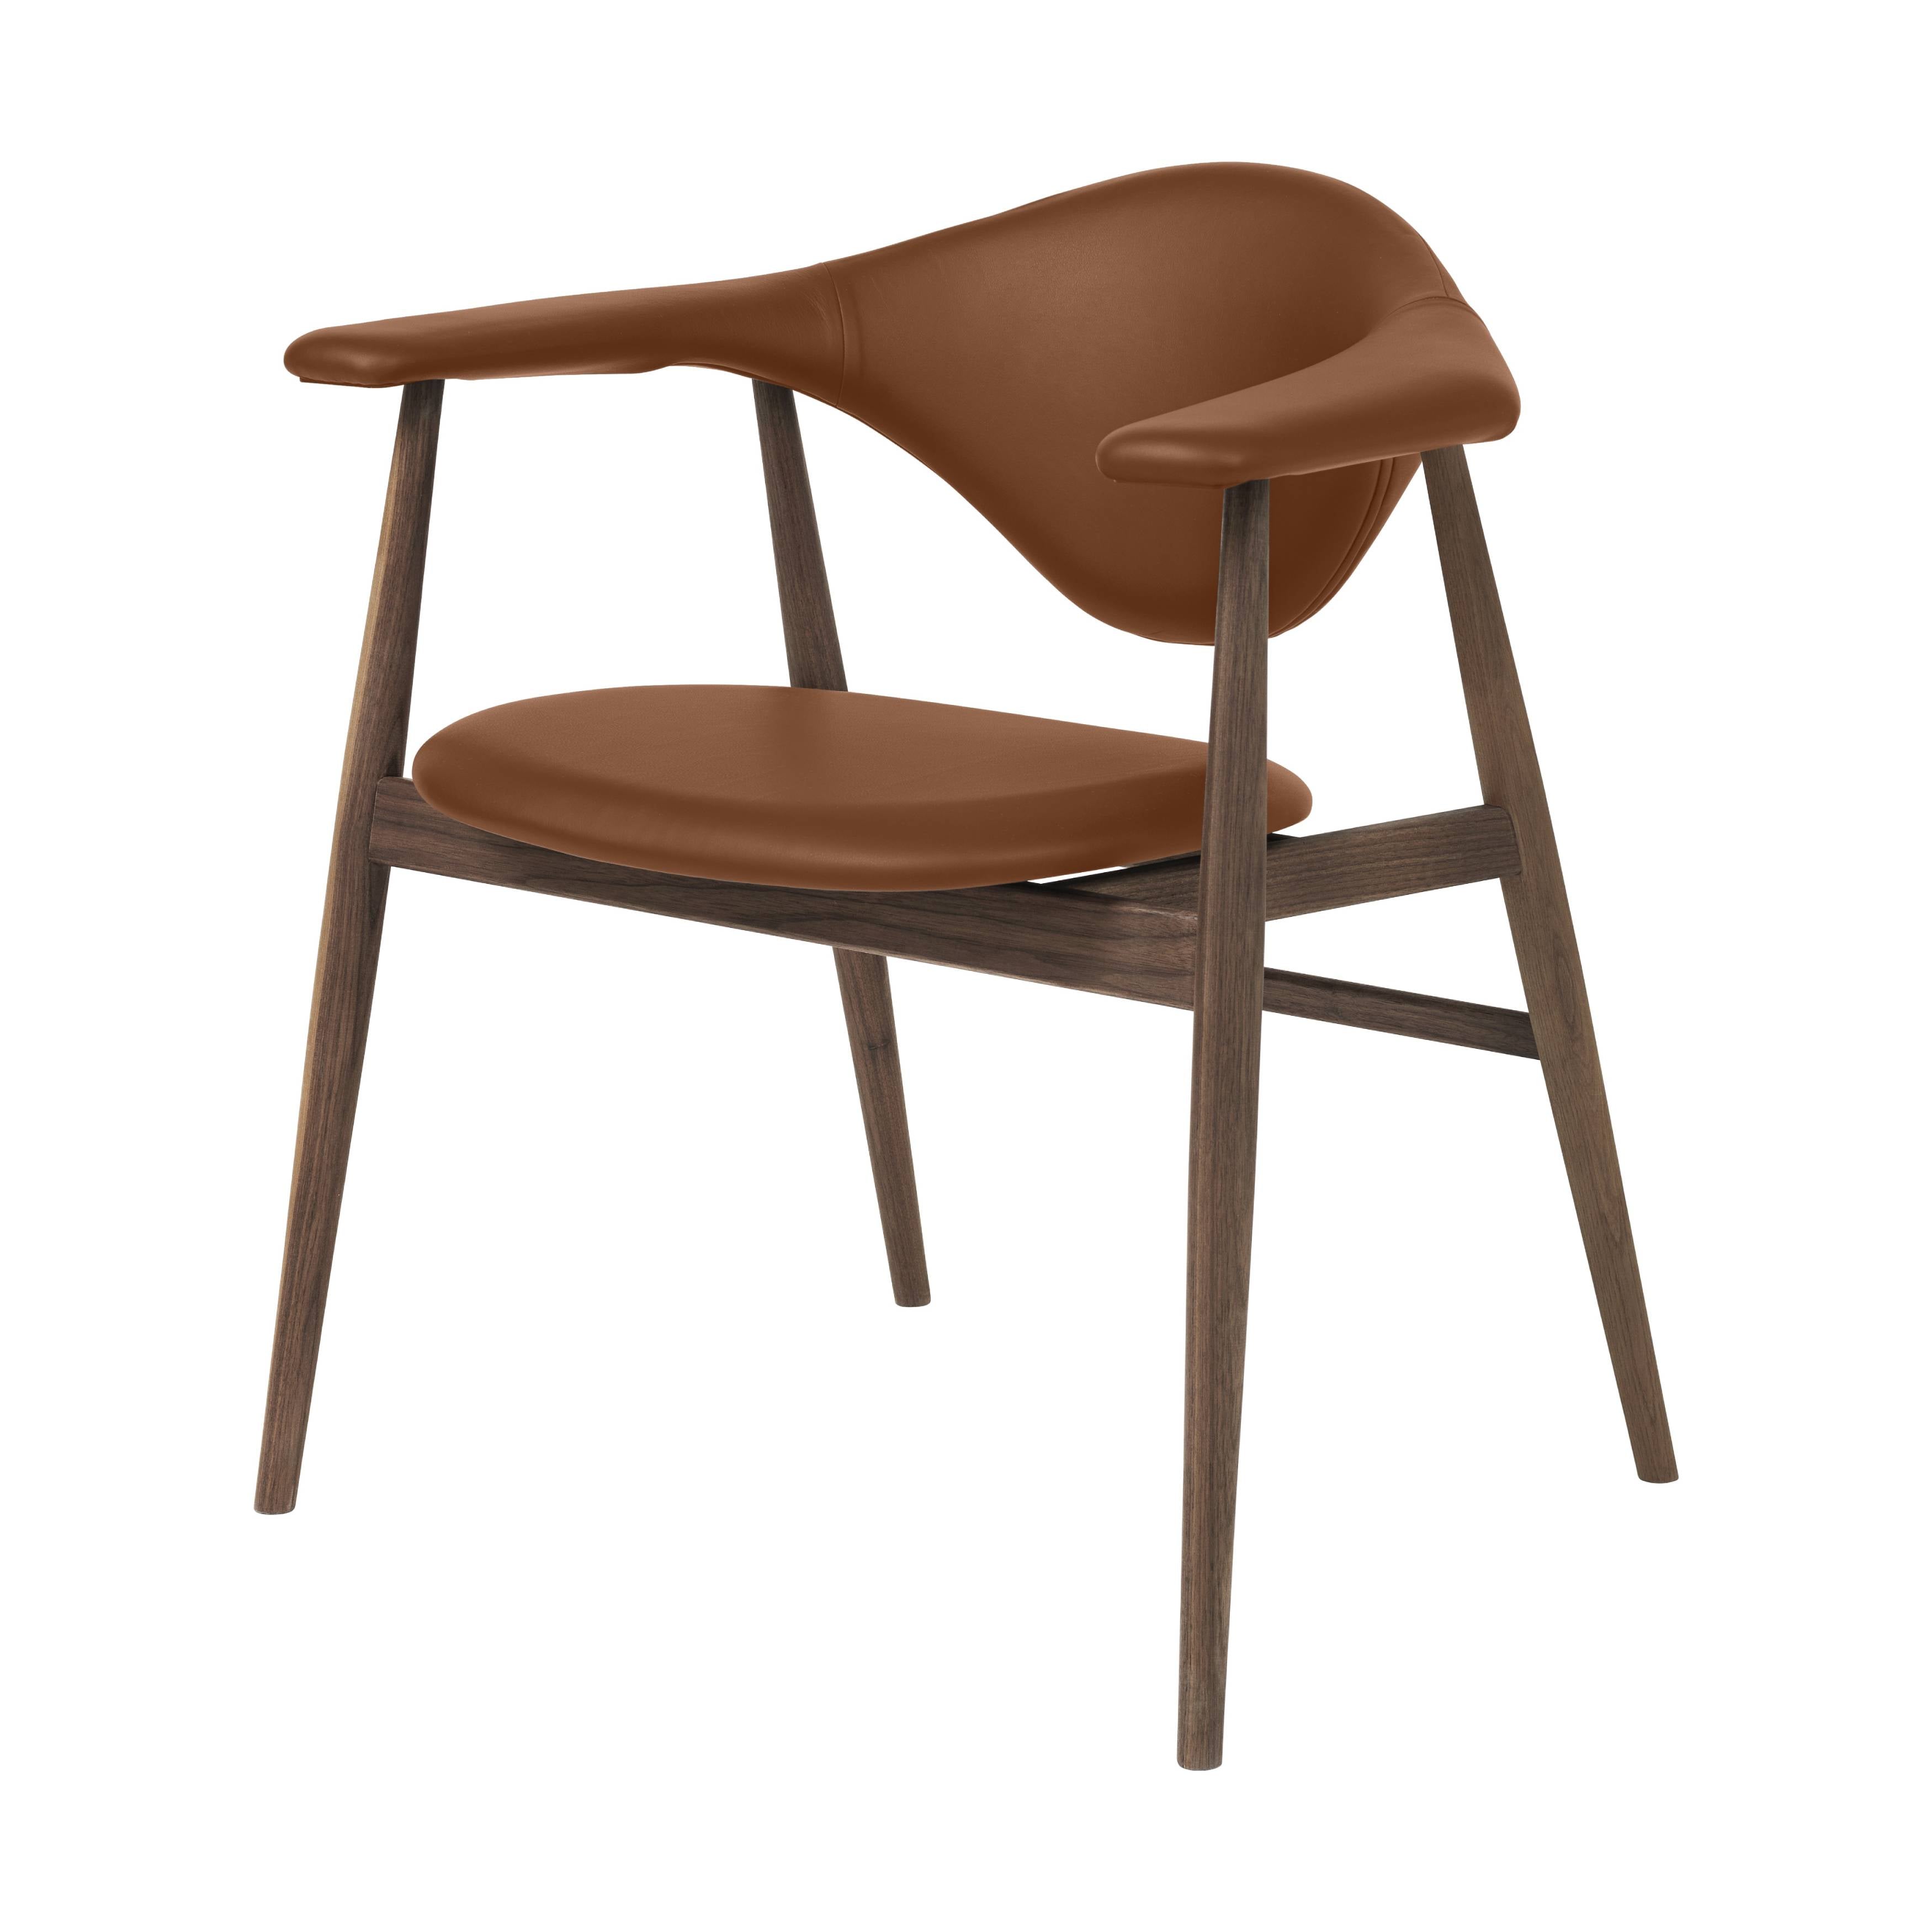 Masculo Dining Chair: Wood Base + Oiled American Walnut